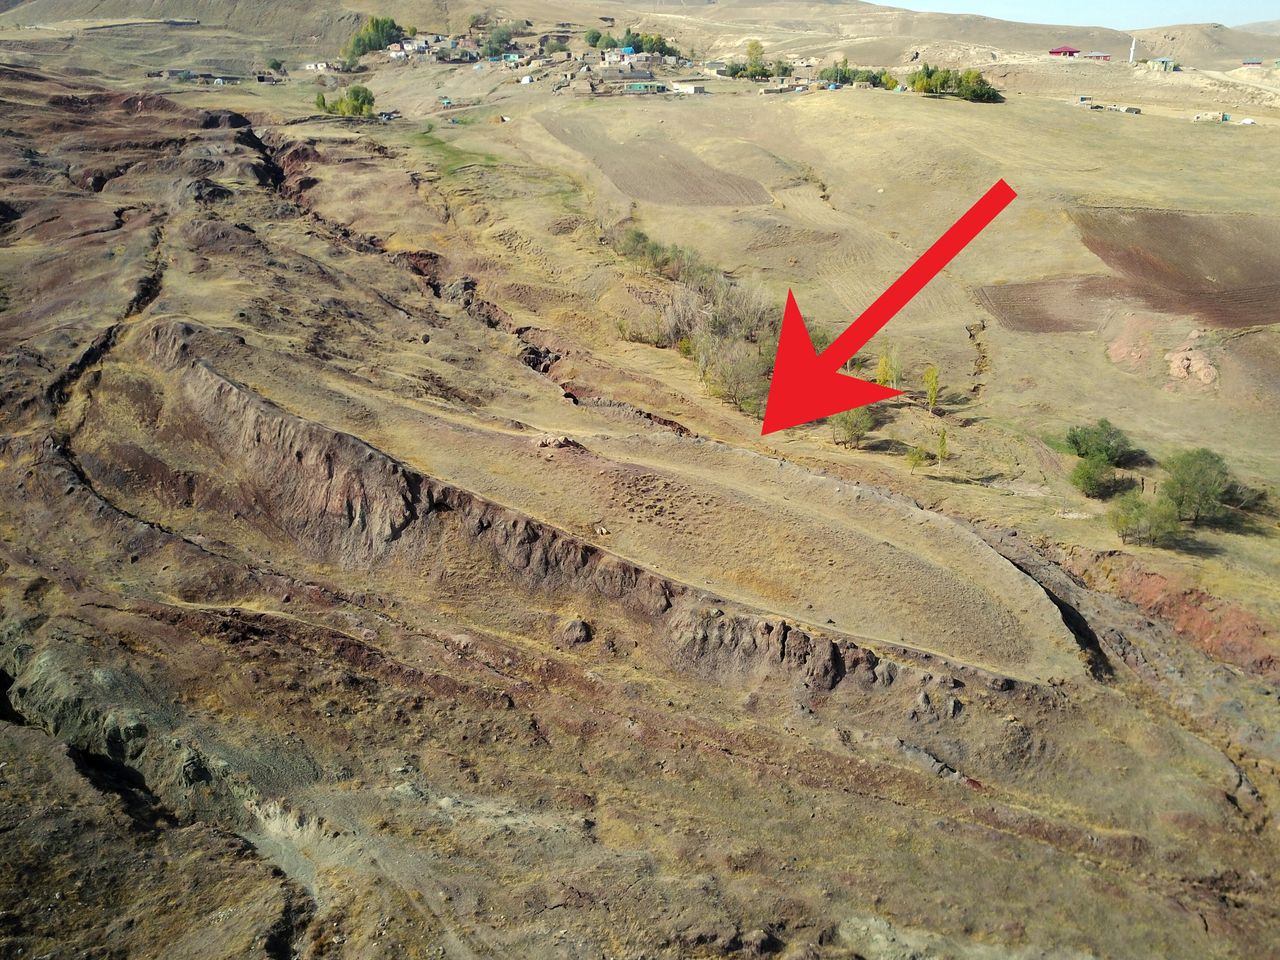 Disputed discovery: Possible Noah's Ark site in Turkish mountains